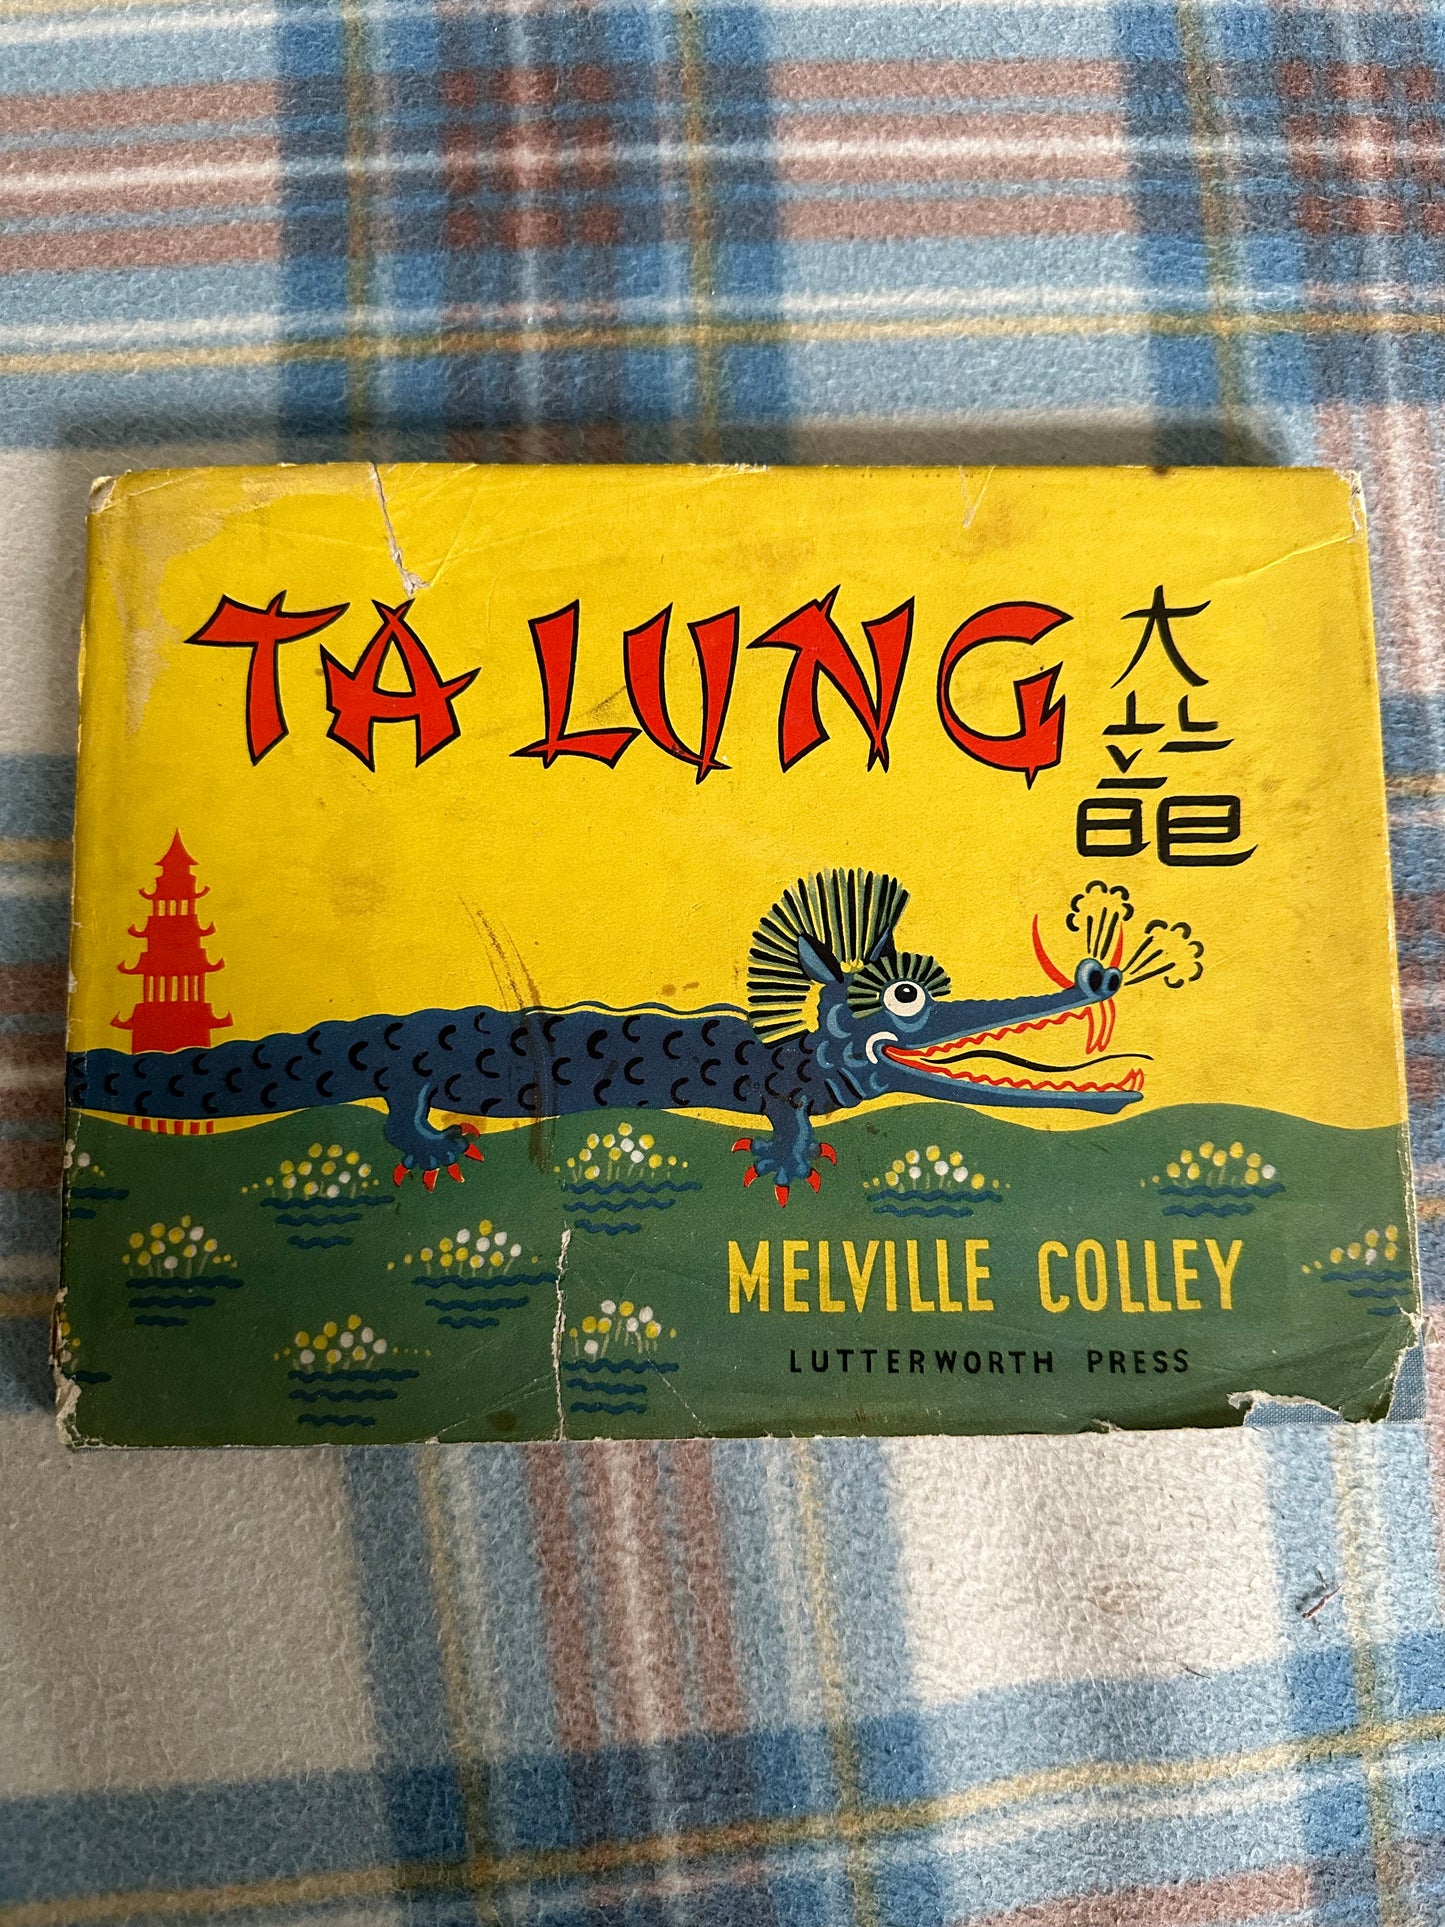 1946*1st* Ta Lung or The Great Dragon - Melville Colley(Lutterworth Press)